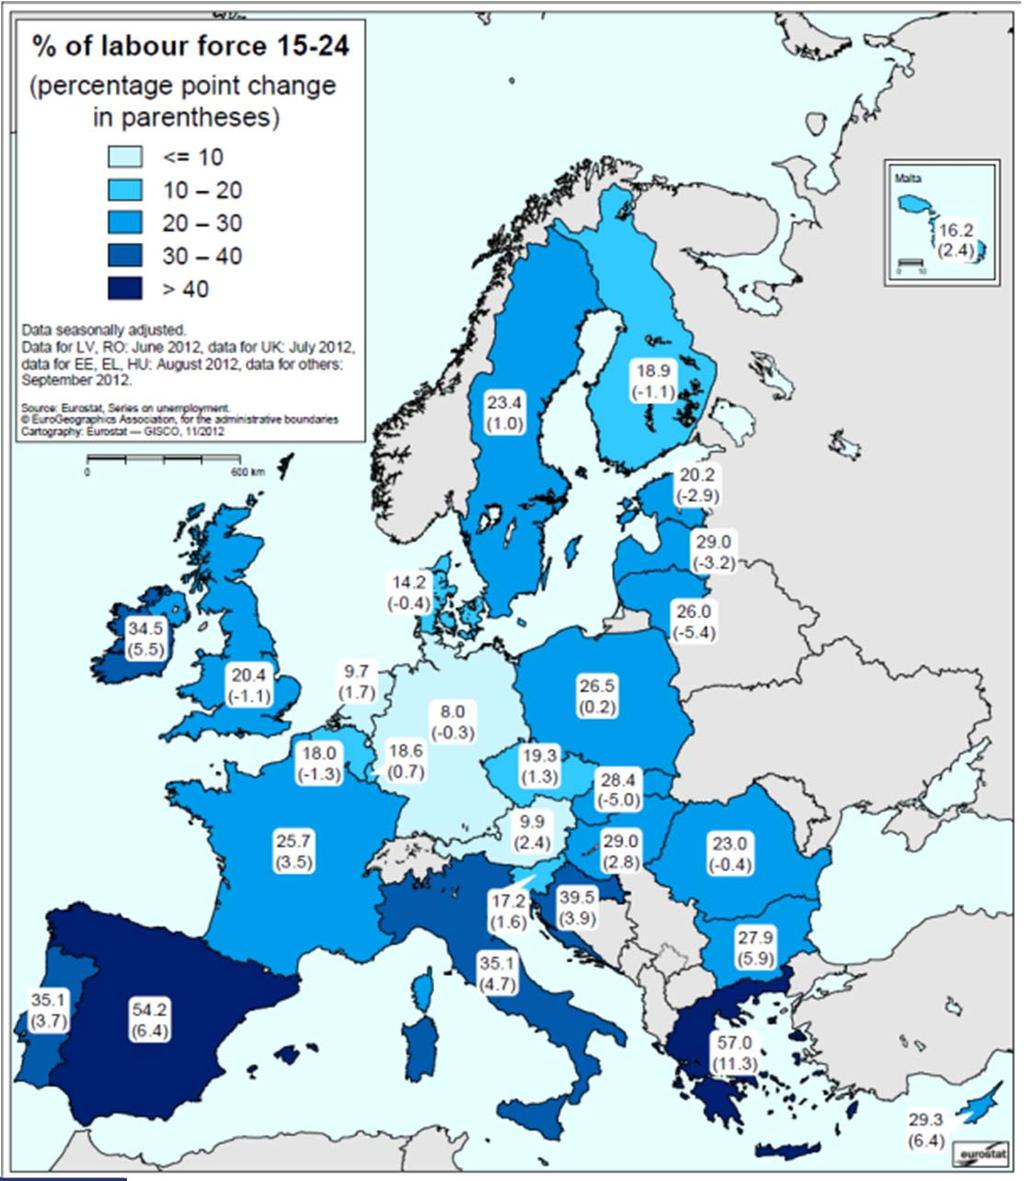 Youth unemployment rates and year-on-year changes, 09/12 Greece, Spain > 55% Italy,